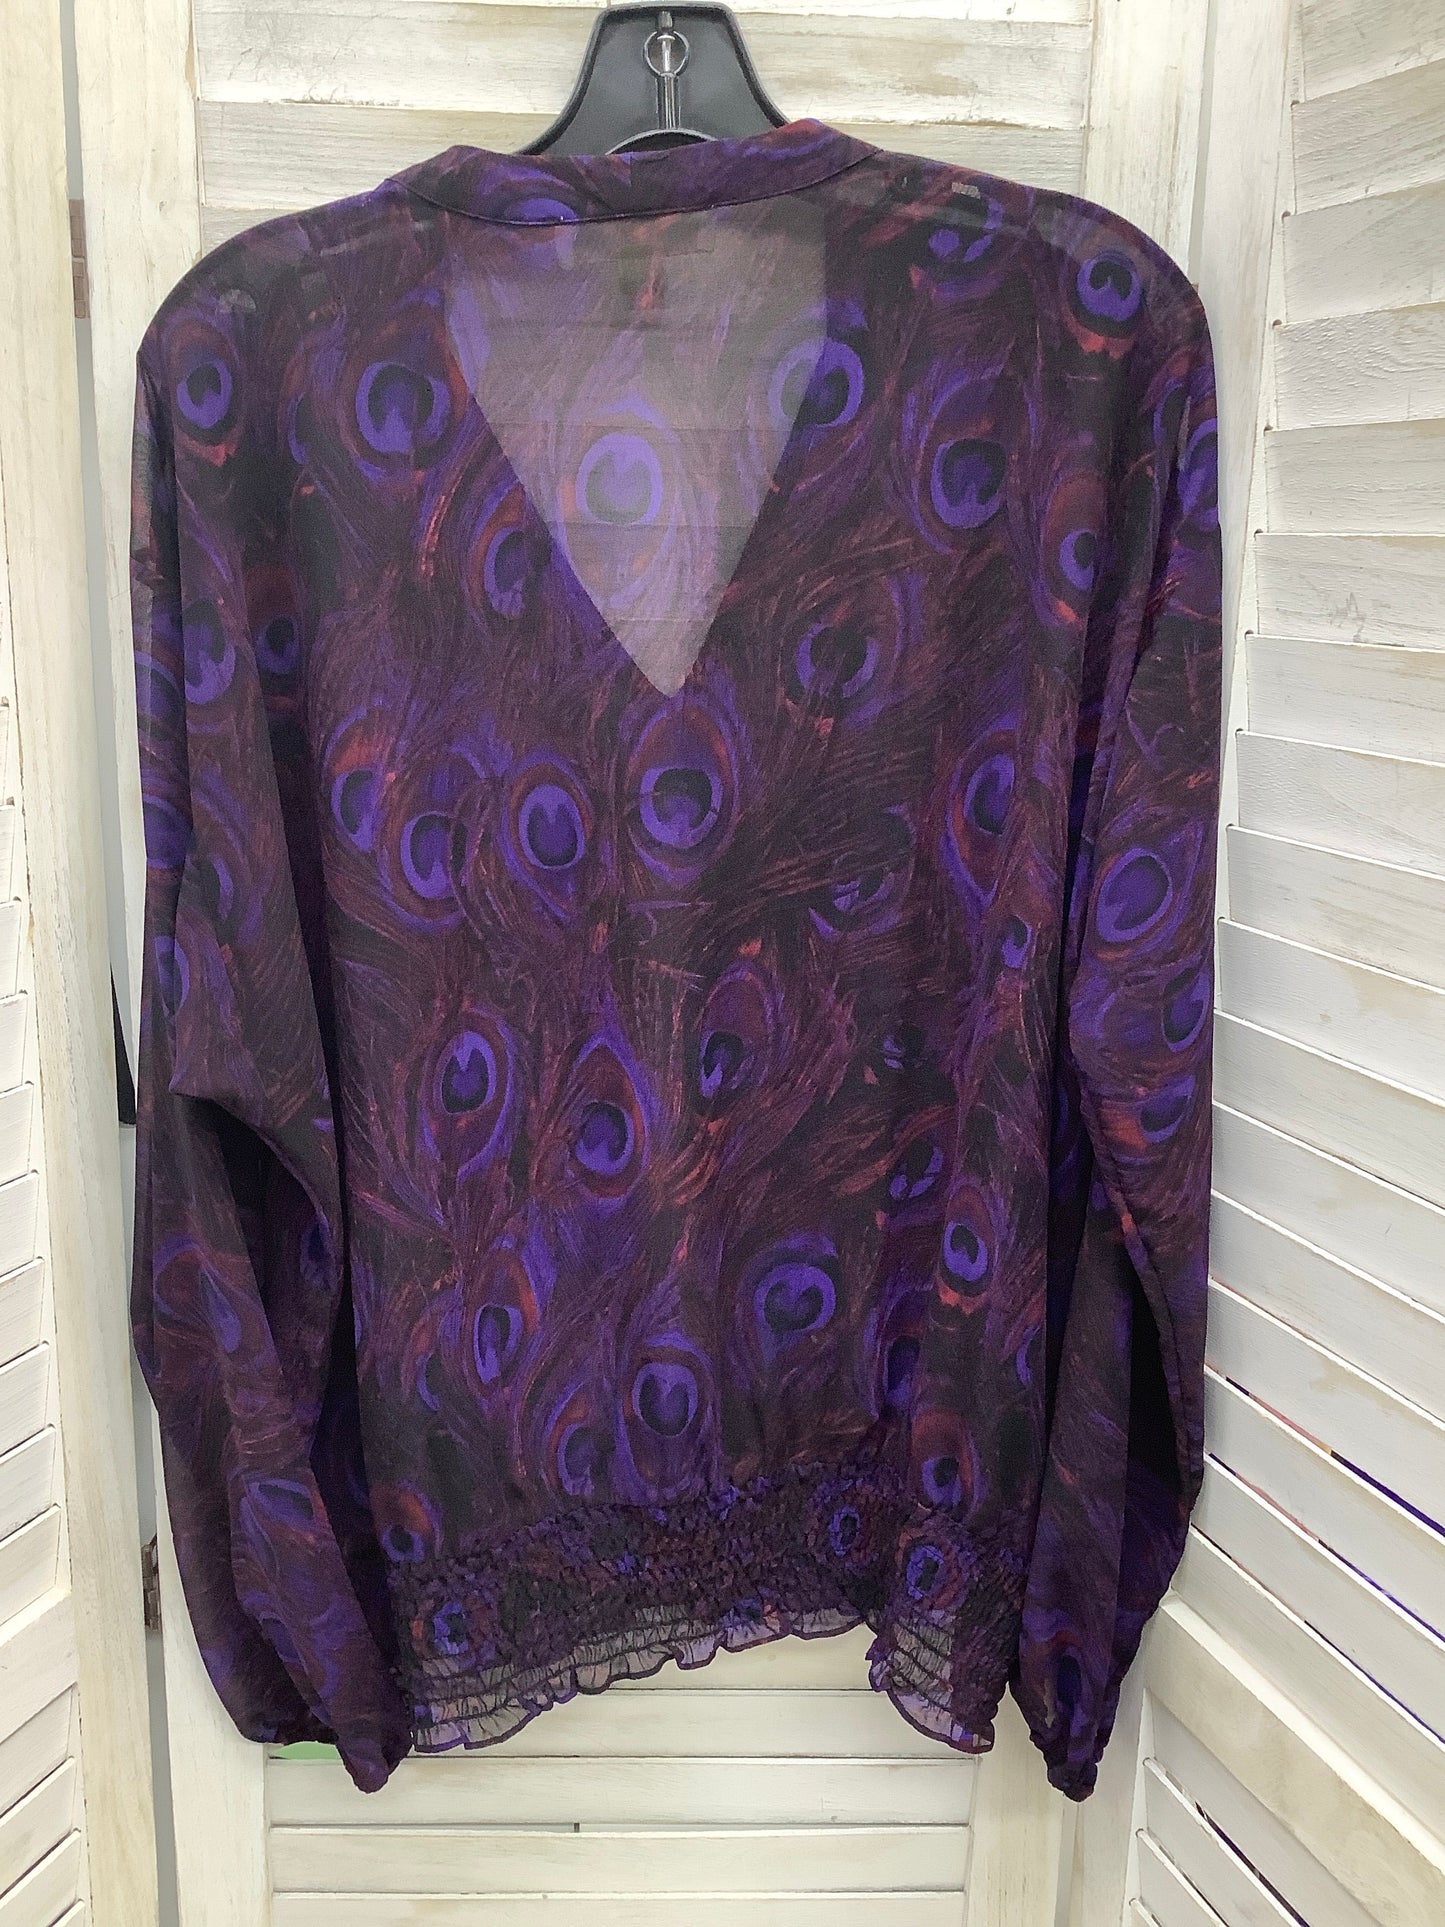 Multi-colored Top Long Sleeve Michael Kors, Size Xl